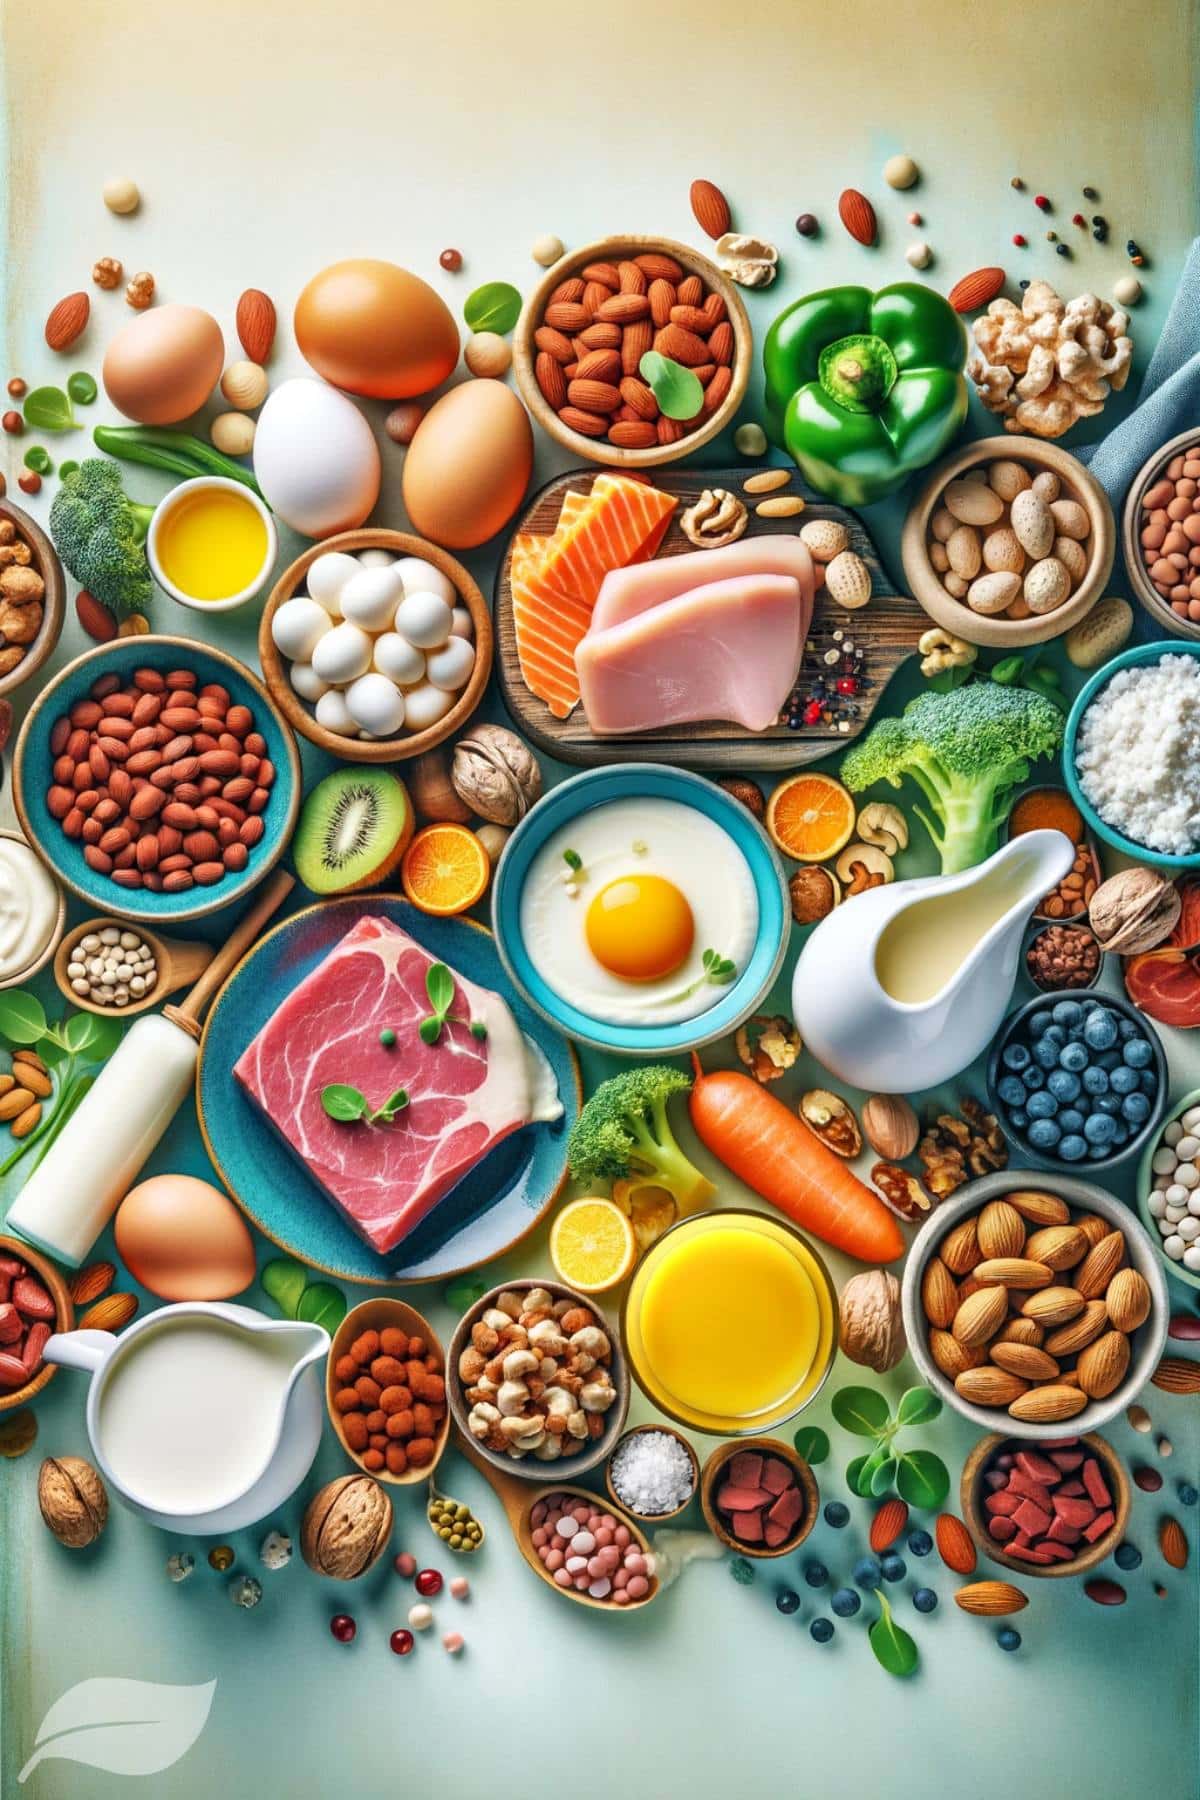 A creative and colorful featured image showcasing a variety of high-protein foods such as eggs, dairy products, nuts, legumes, and meats